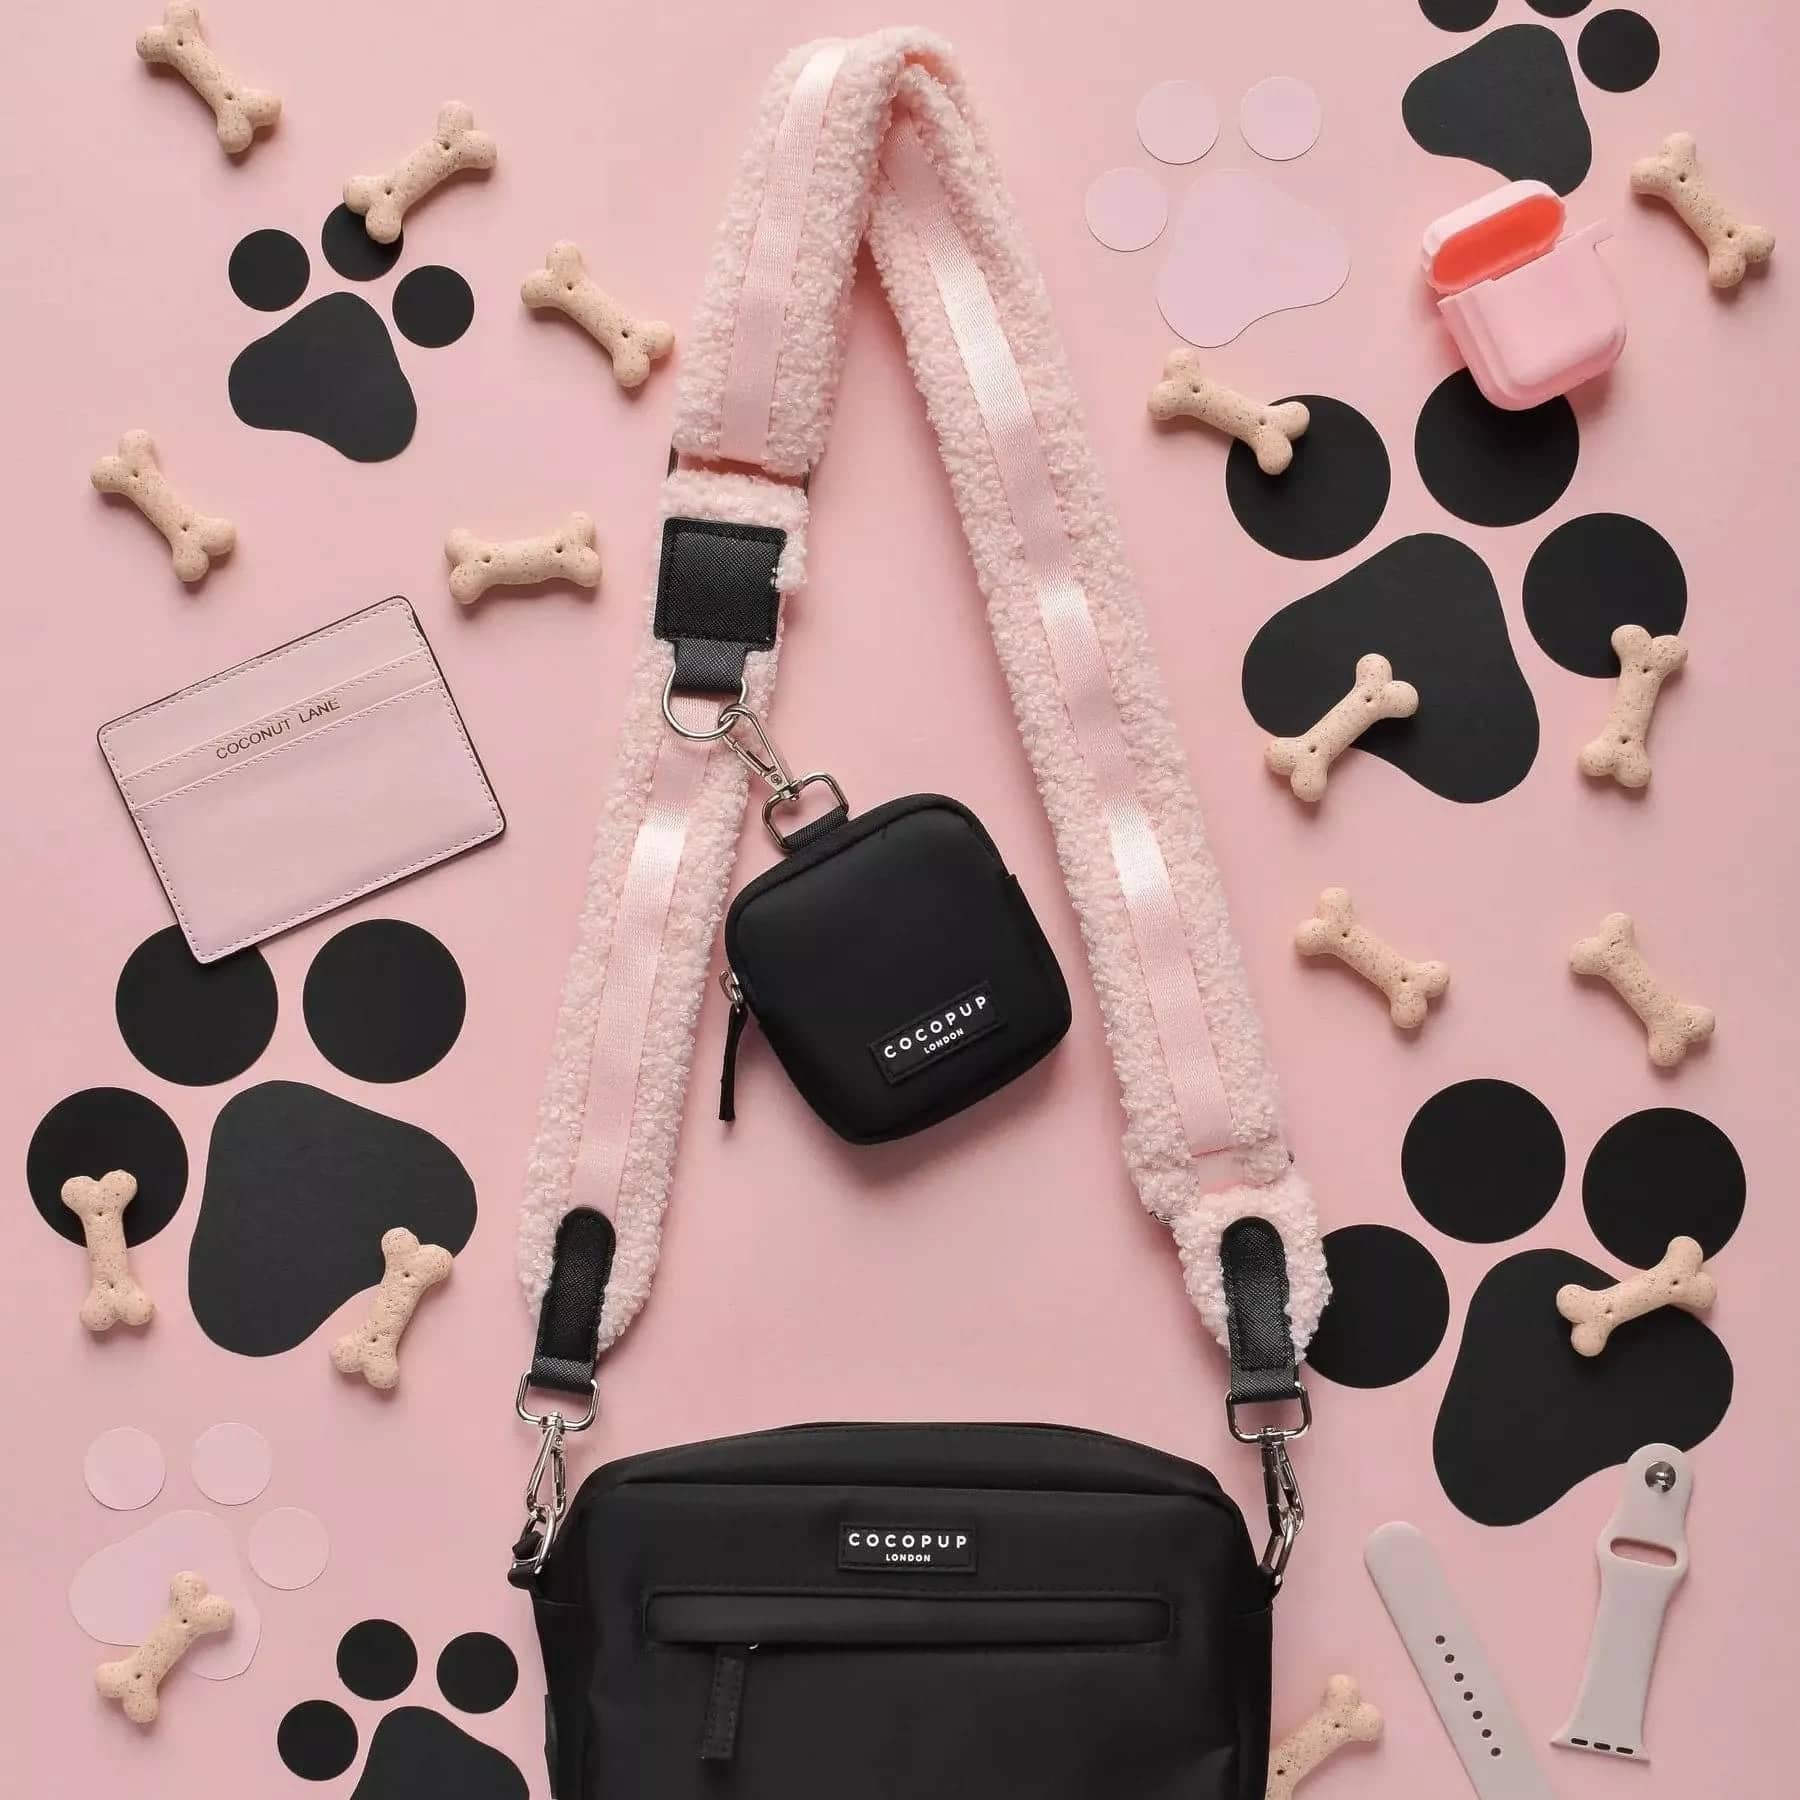 Stylish teddy-themed strap for pet owners